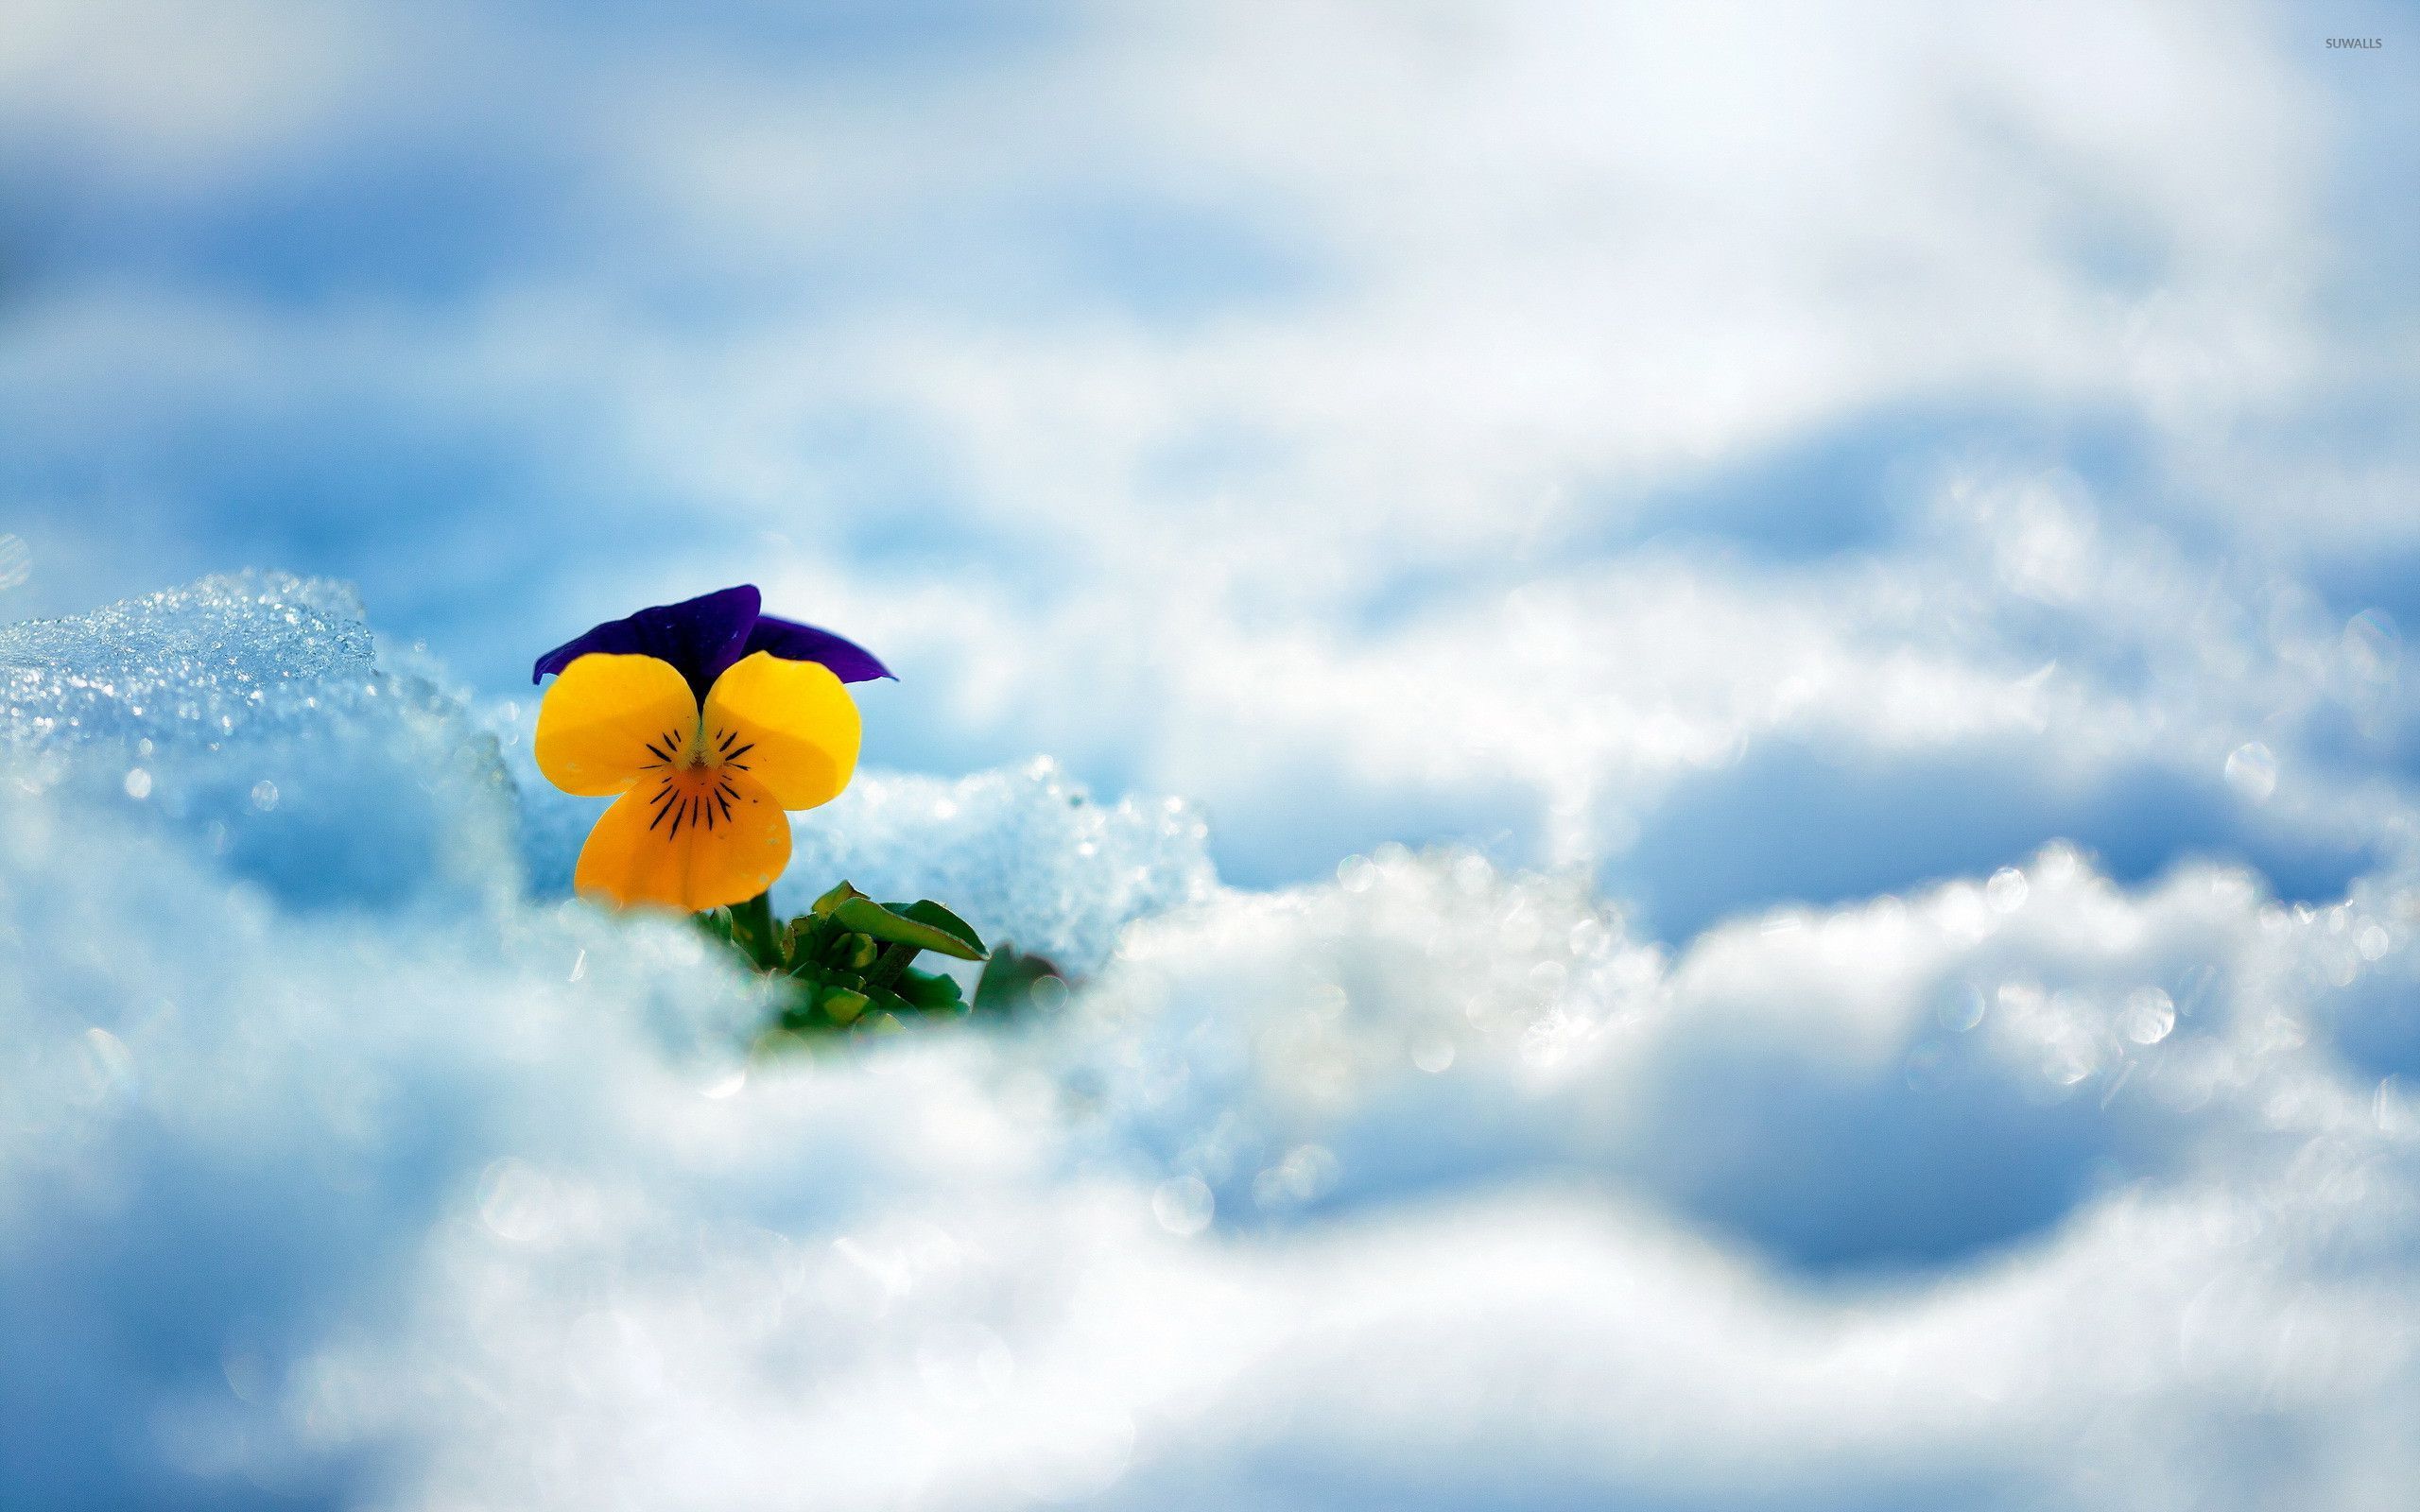 Pansy In The Snow Wallpaper Flower